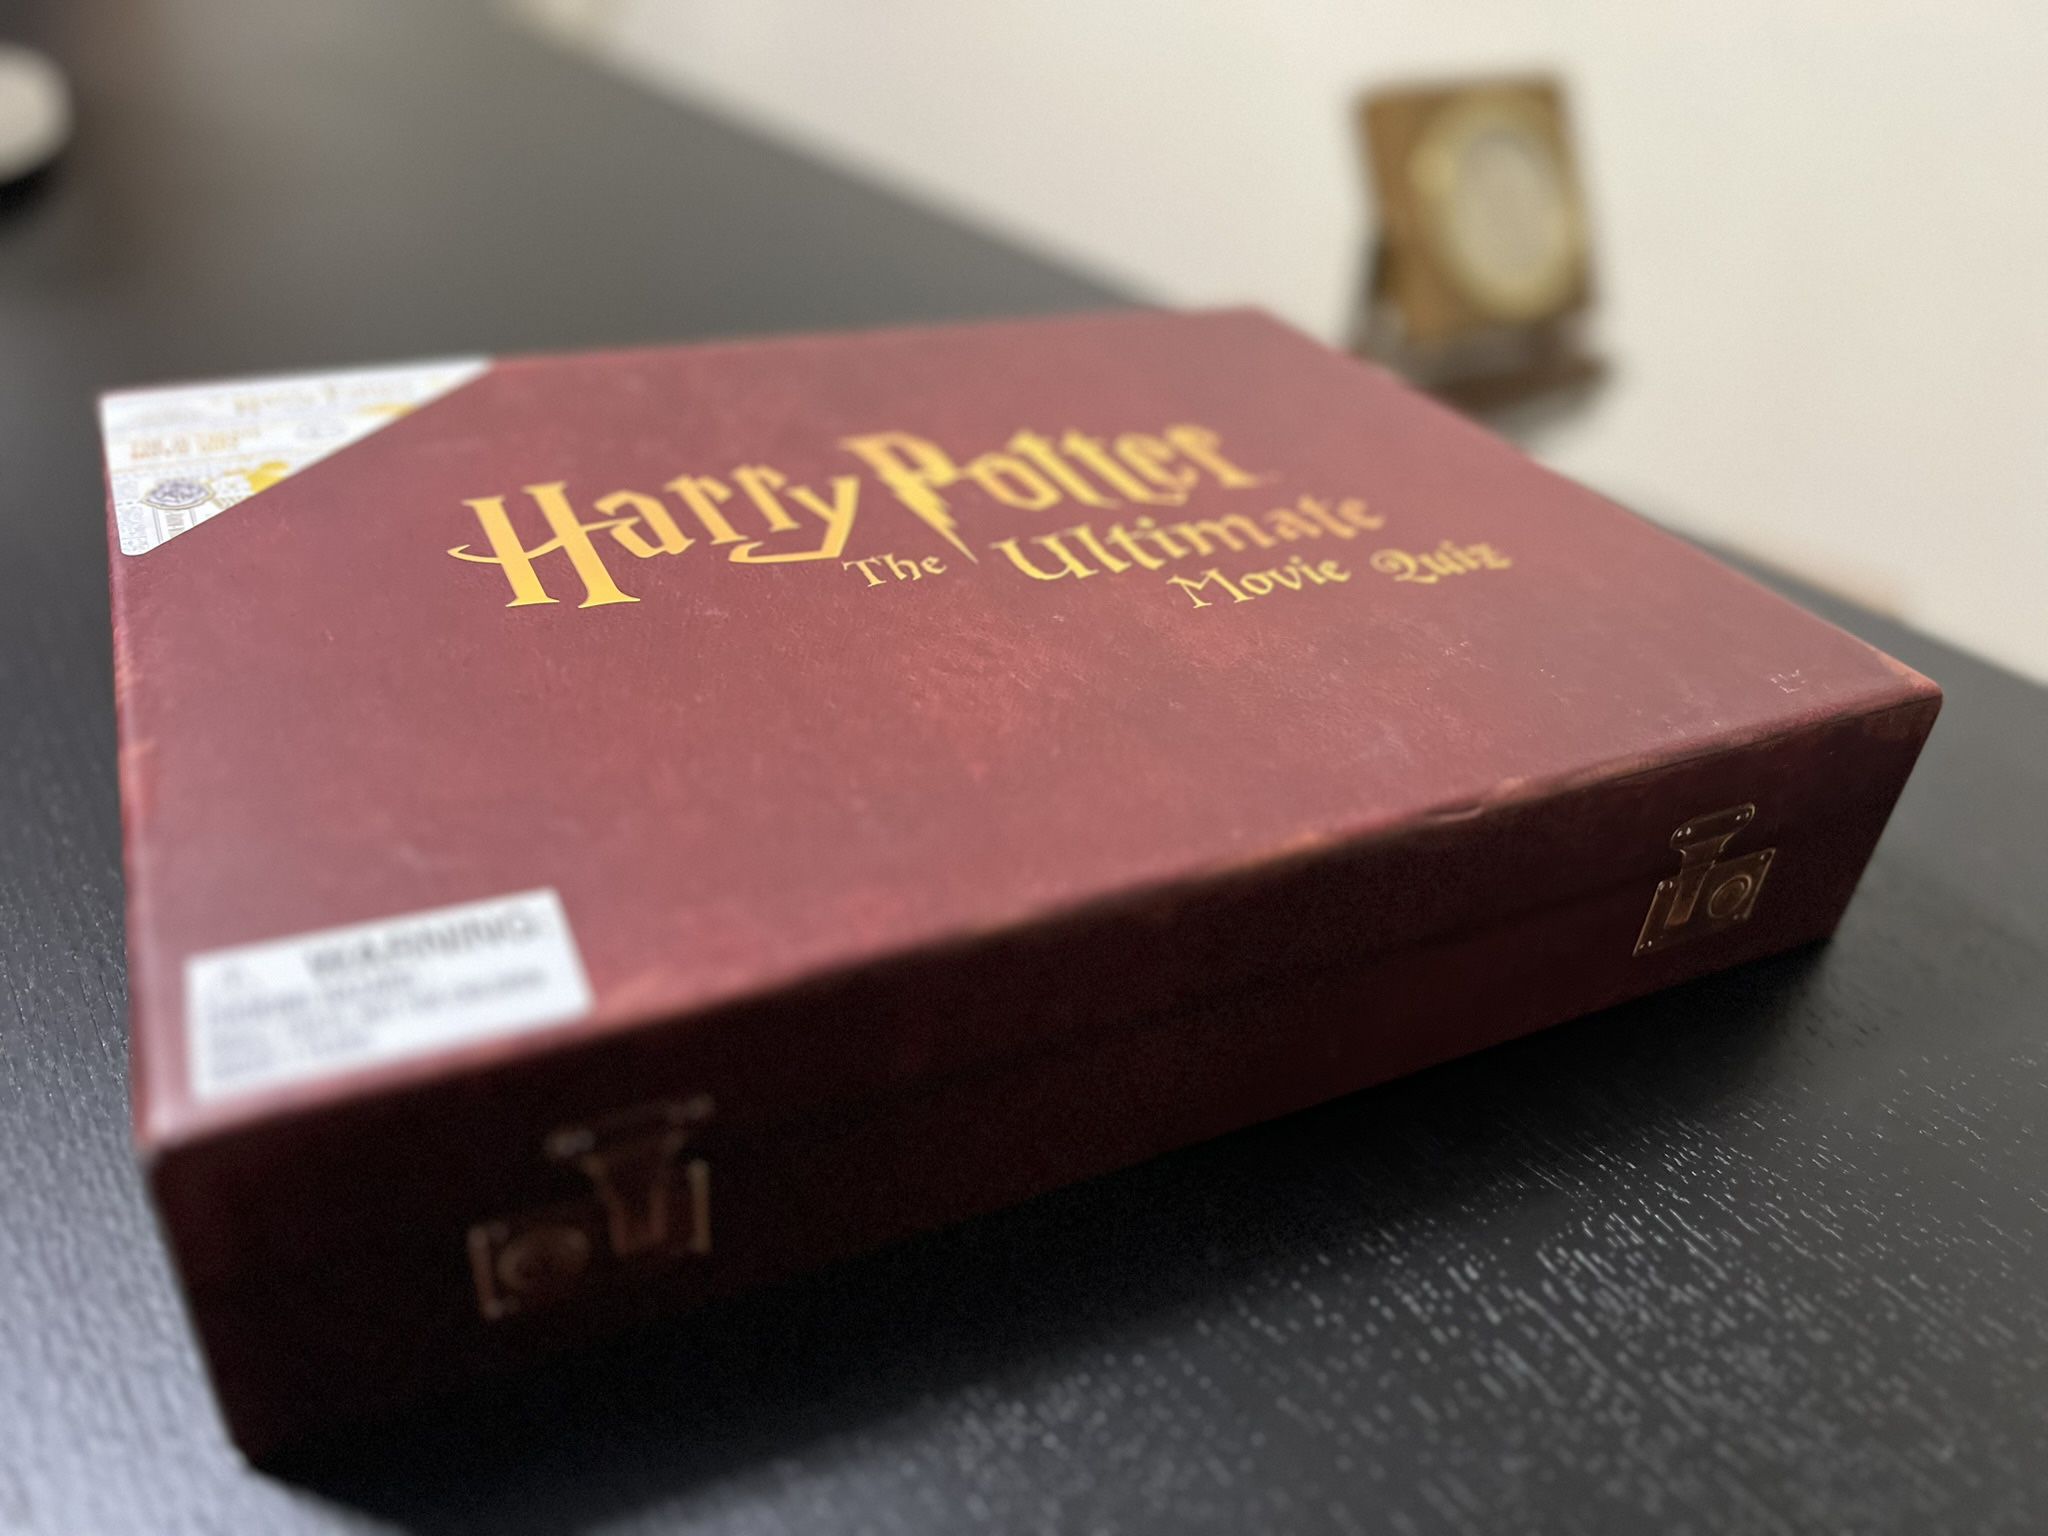 Harry Potter The Ultimate Movie Quiz Card Game Wizarding World Board game